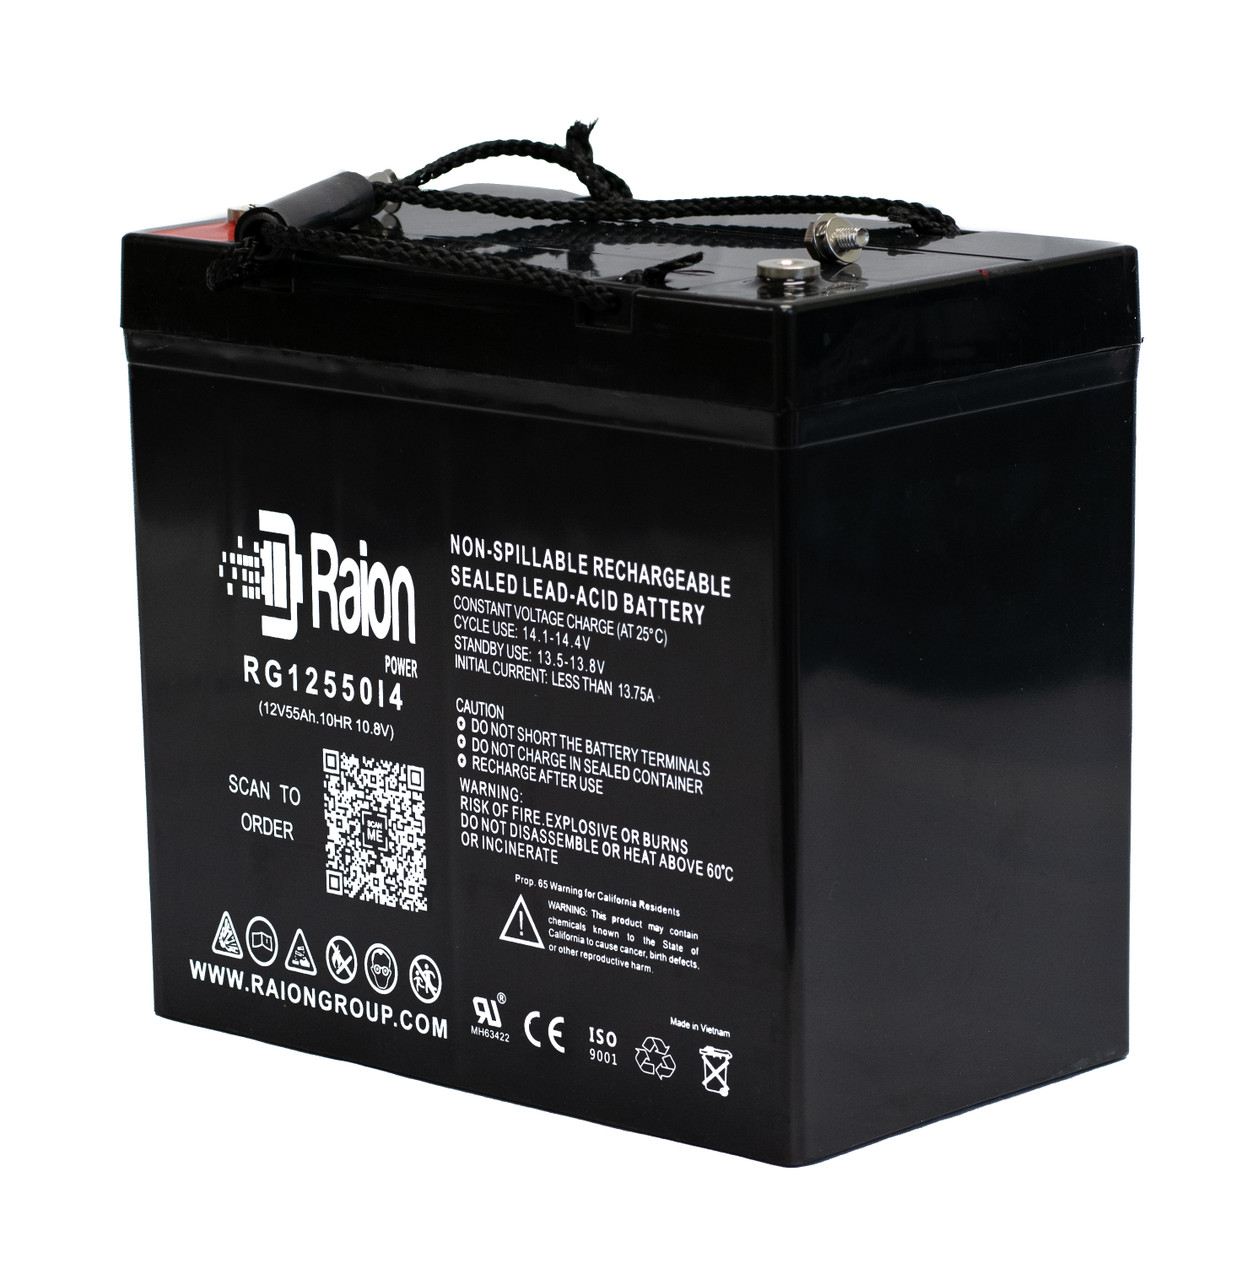 Raion Power 12V 55Ah 22NF Mobility Scooter Battery Replacement for Streamer-Power Chairs 888W5